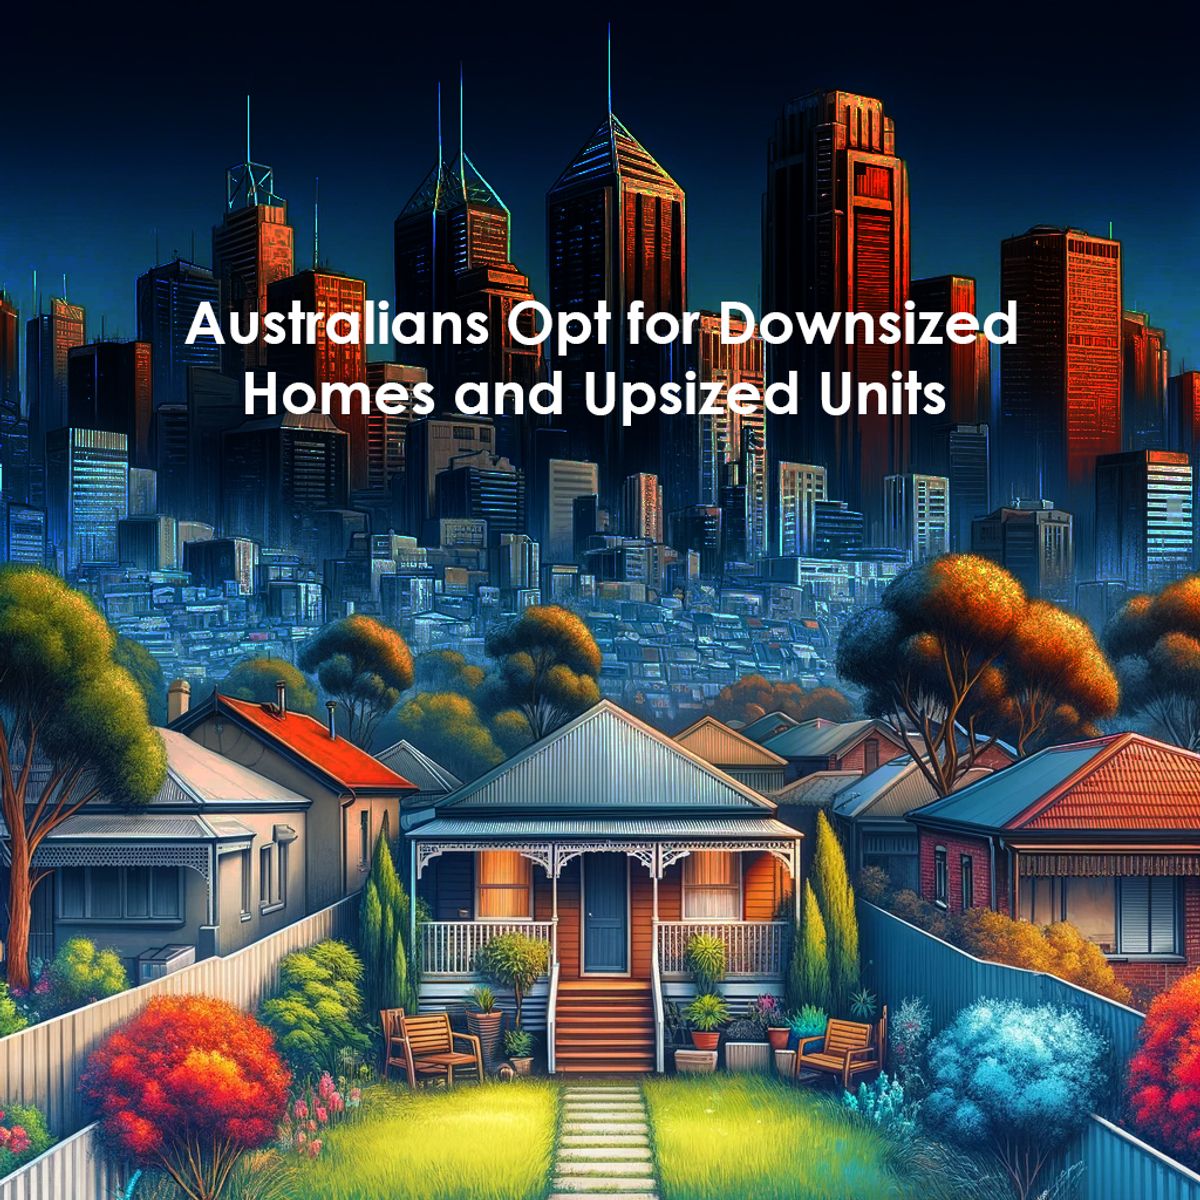 Australians Opt for Downsized Homes and Upsized Units